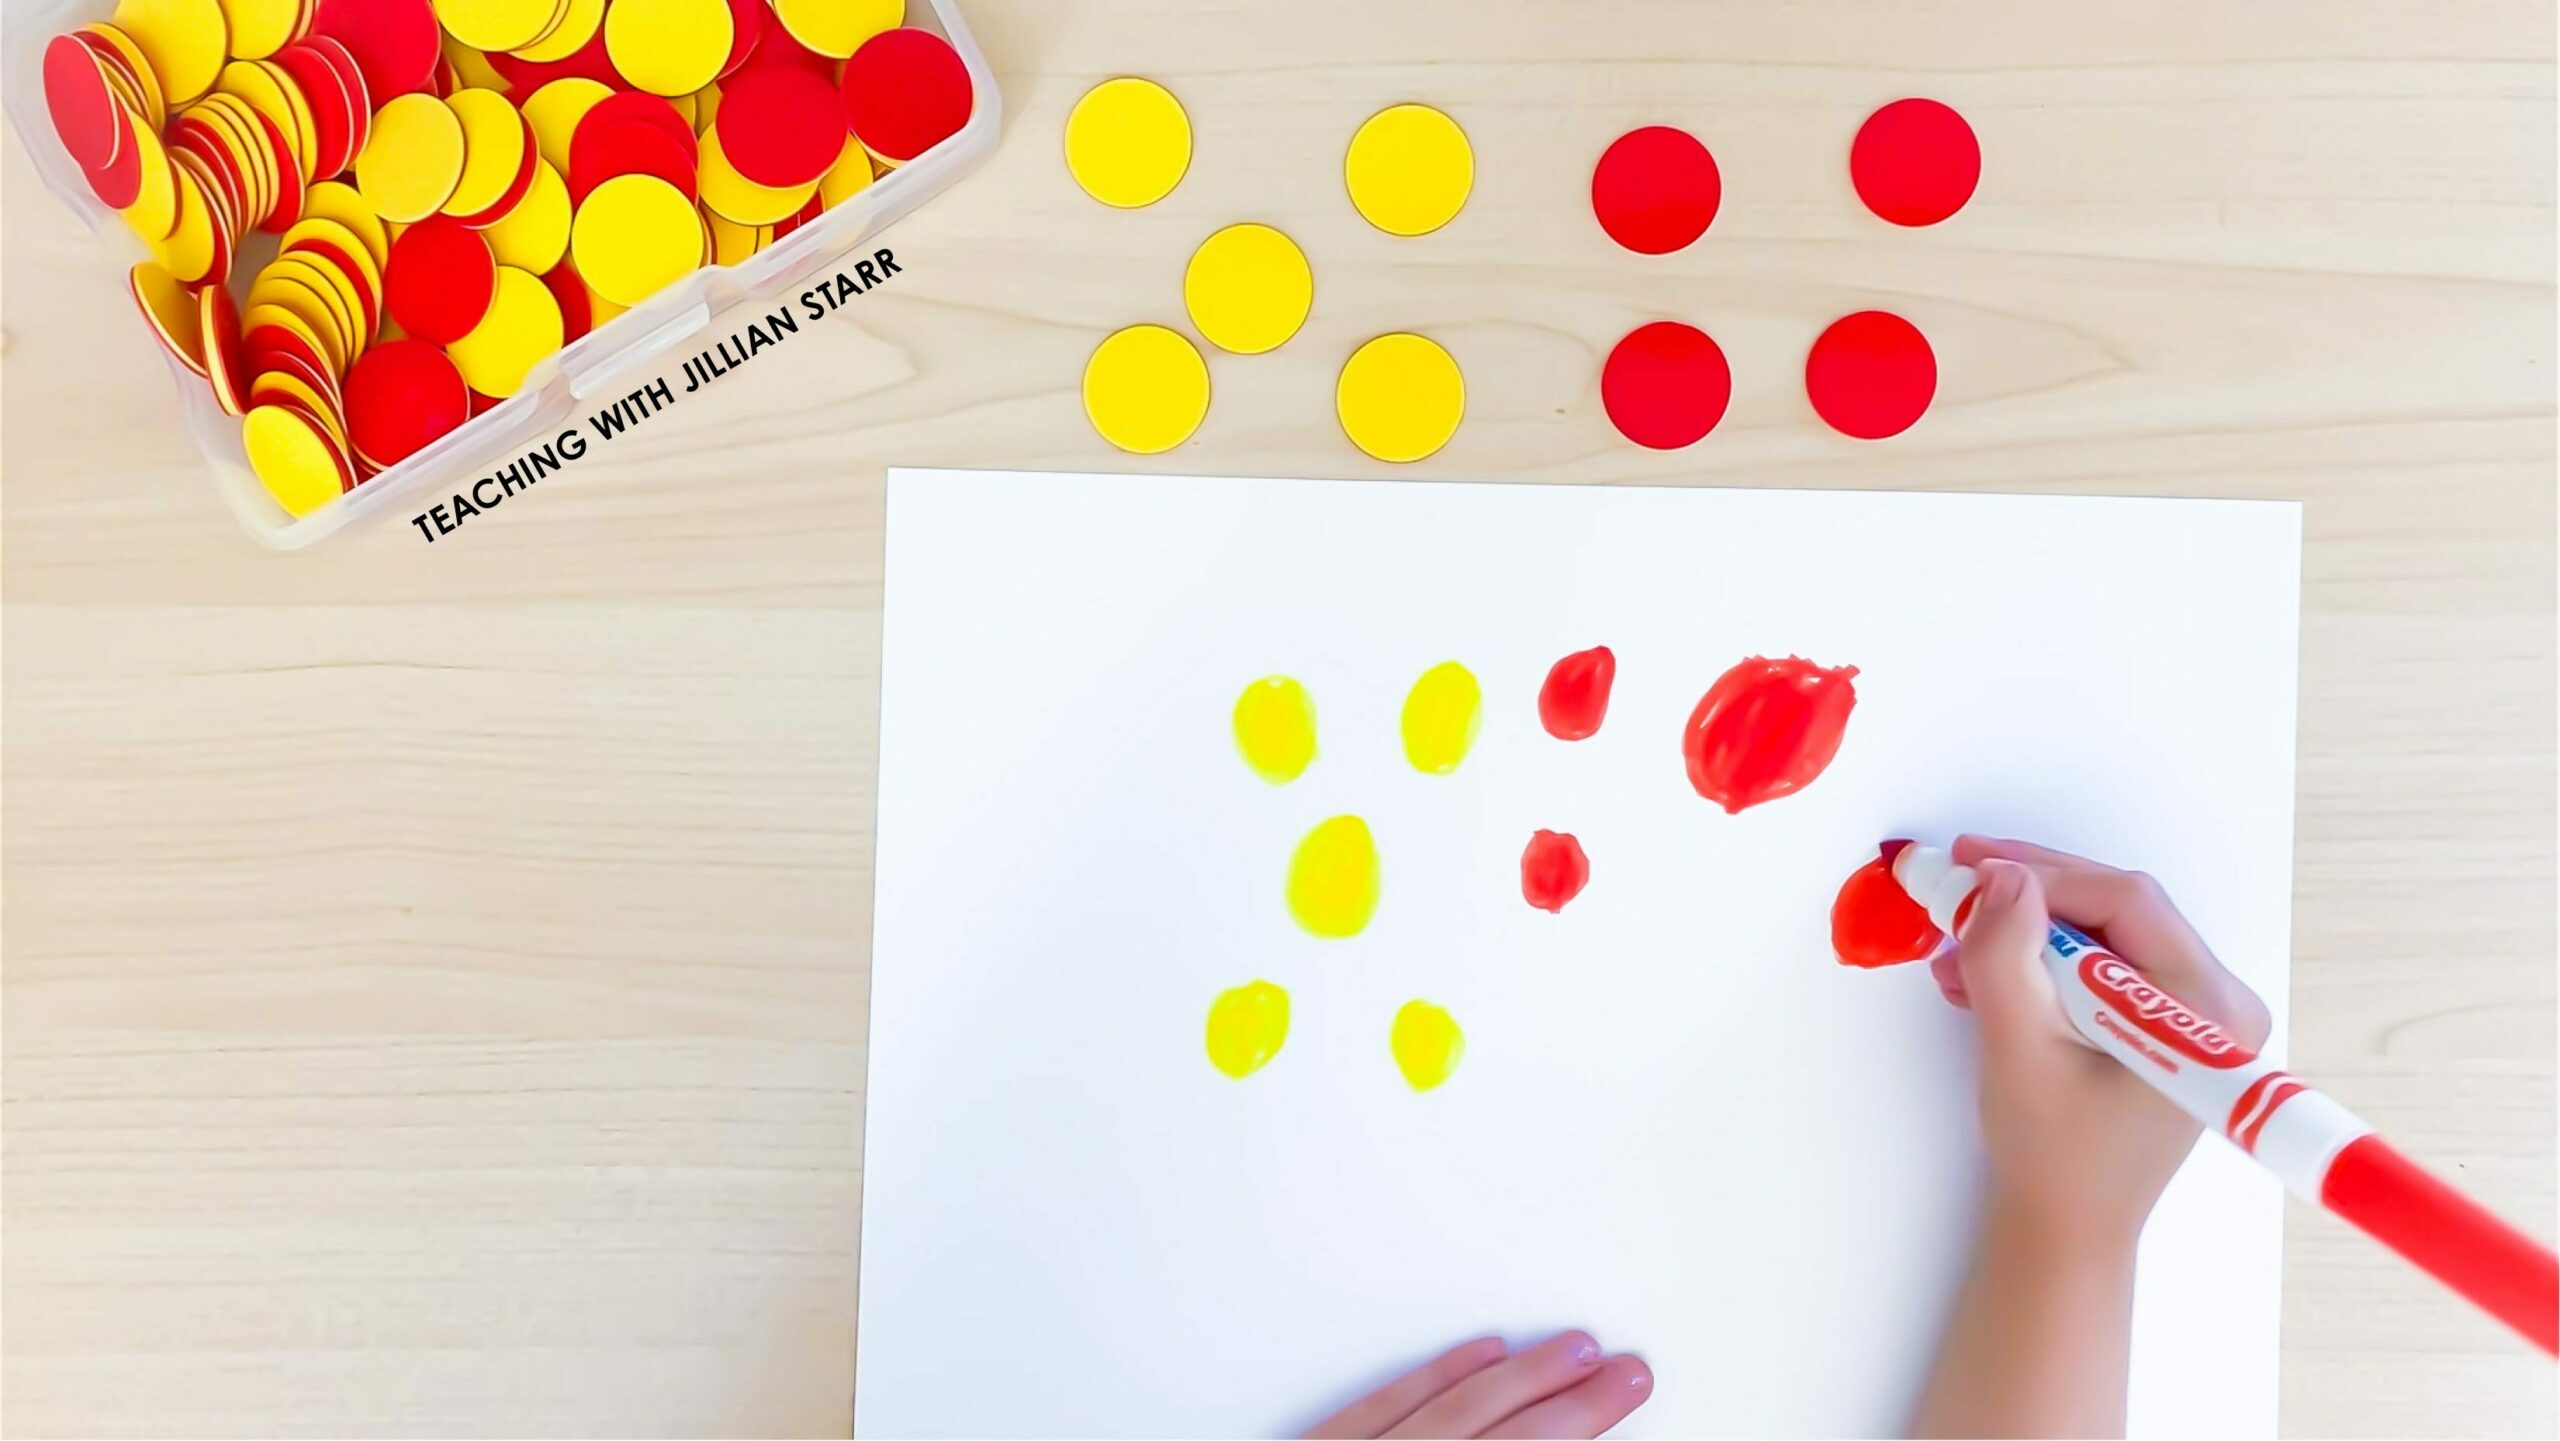 A visual representation of a concrete manipulative. This photo shows a sketch of 5 yellow counters and 4 red counters.